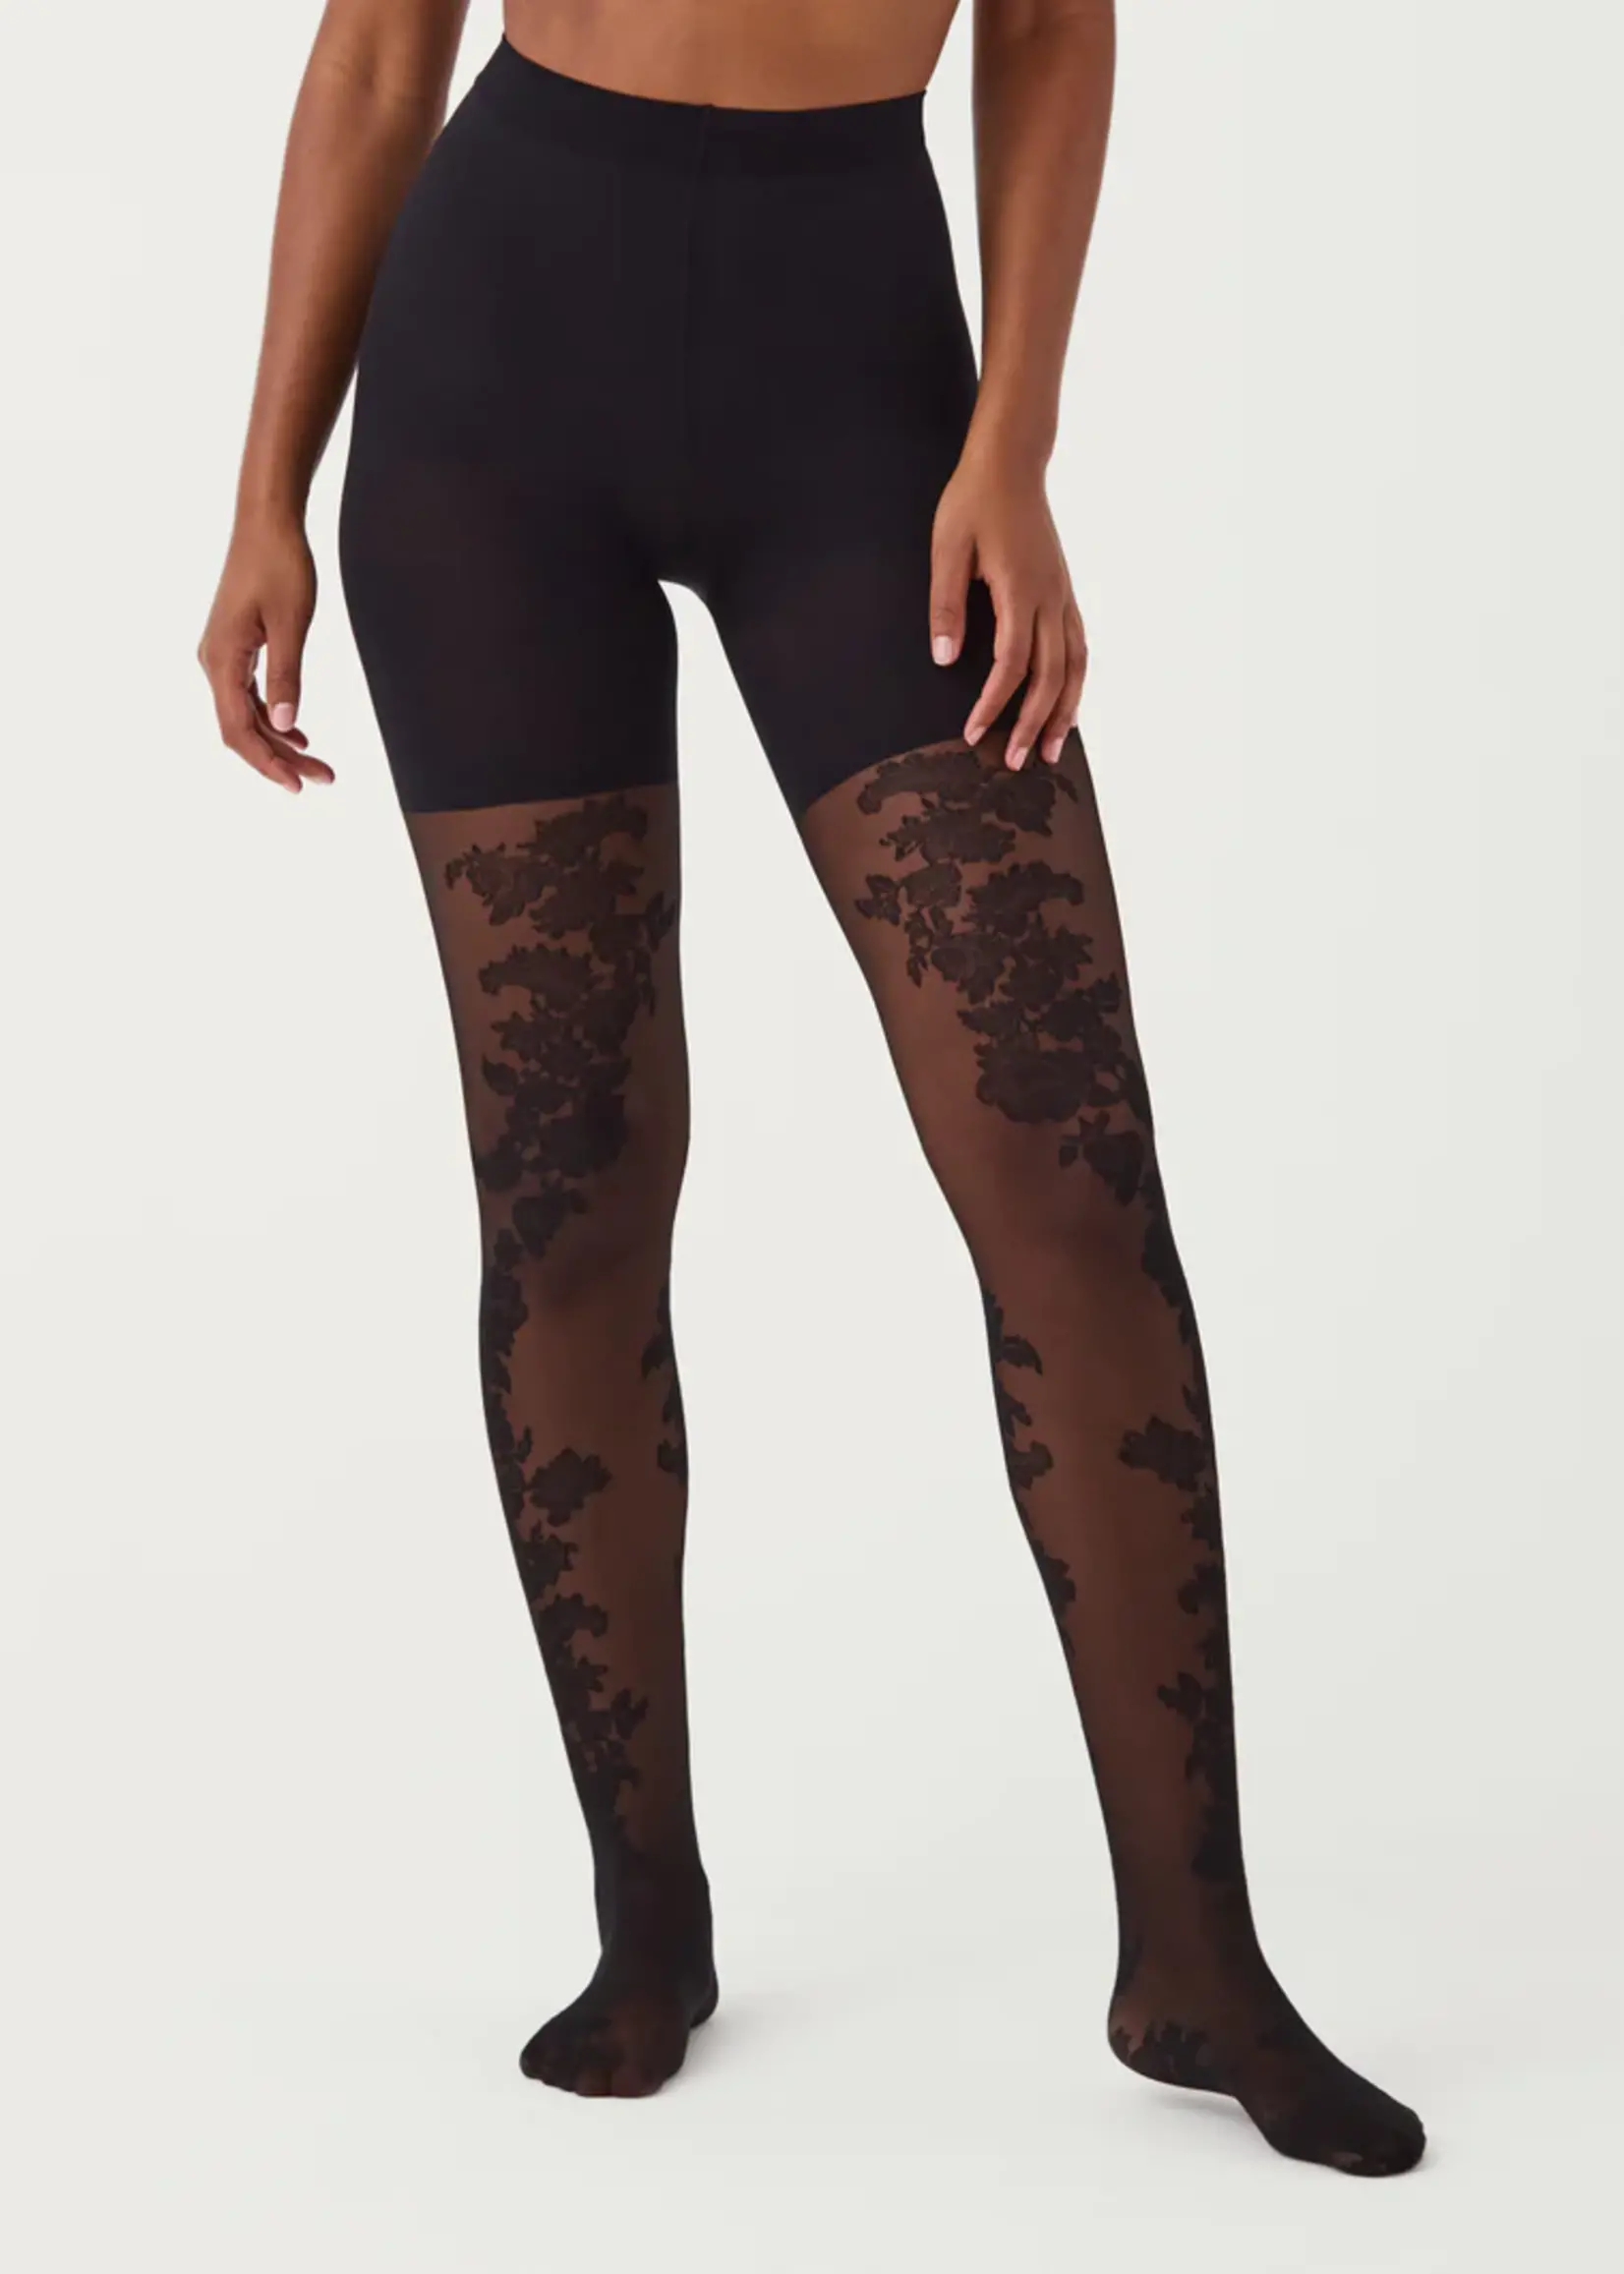 SPANX Floral Tights